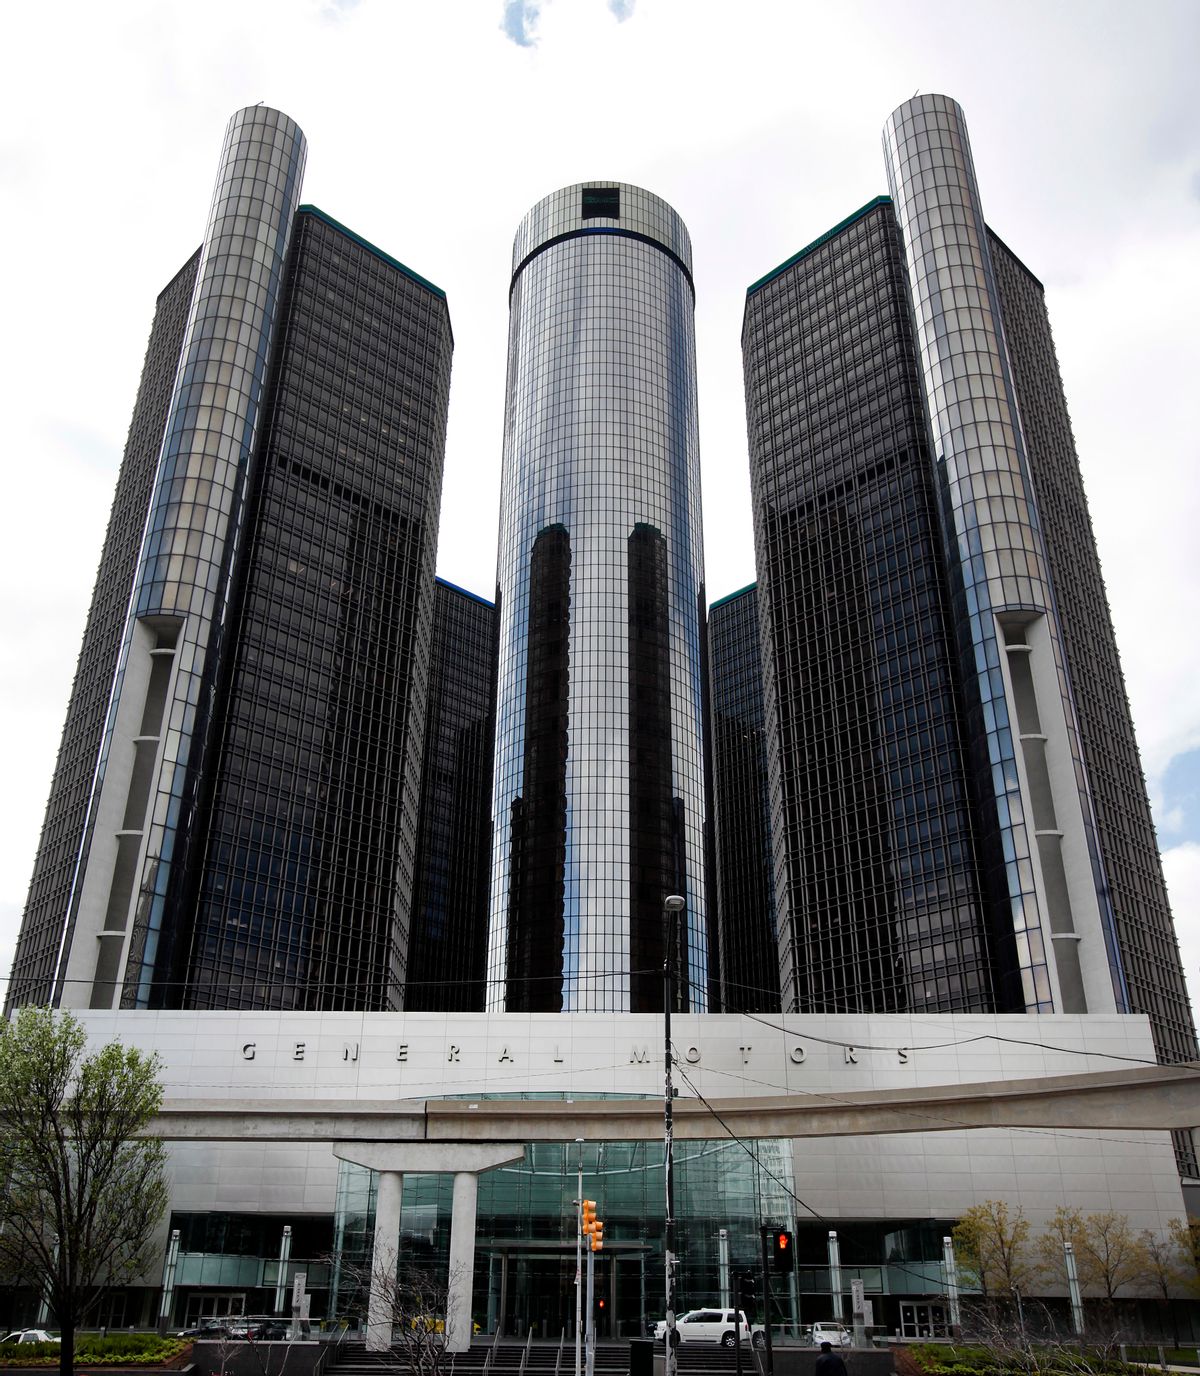 This Friday, May 16 2014 photo shows General Motors' world headquarters in Detroit. U.S. safety regulators fined General Motors a record $35 million Friday for taking at least a decade to disclose defects with ignition switches in small cars that are now linked to at least 13 deaths. (AP Photo/Paul Sancya) (AP)